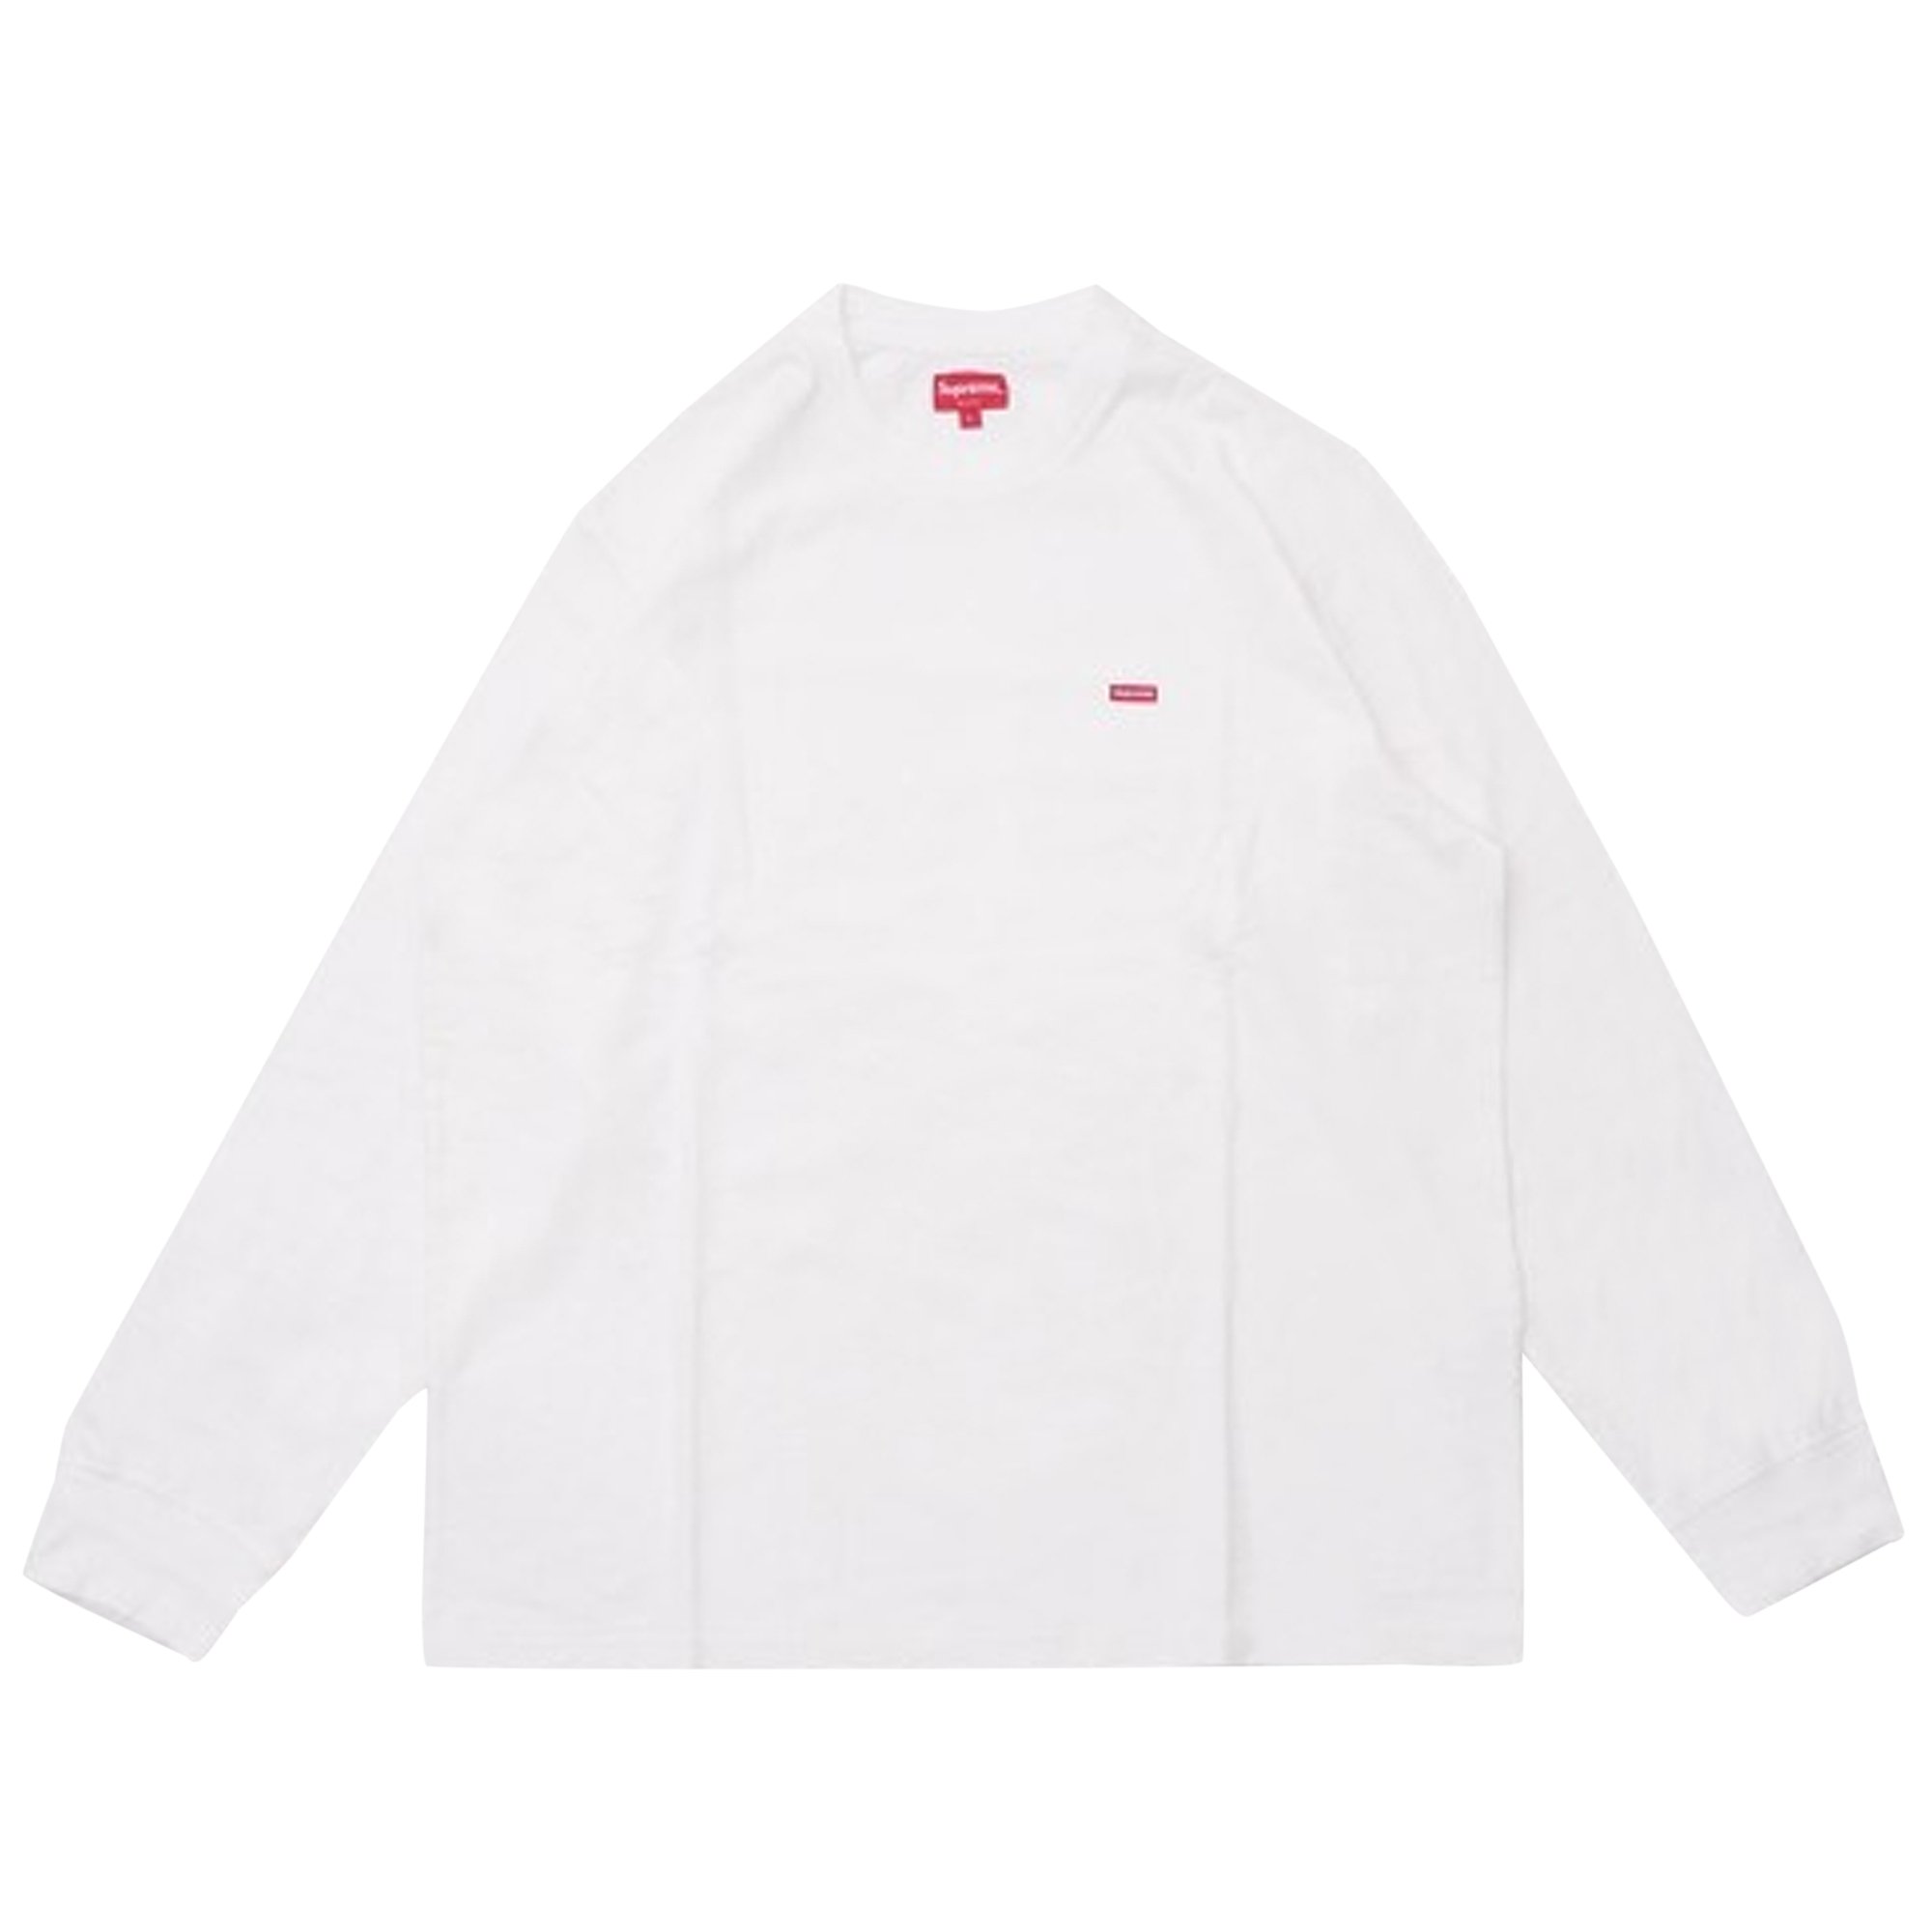 Buy Supreme Small Box Long-Sleeve Tee 'White' - SS20KN88 WHITE | GOAT